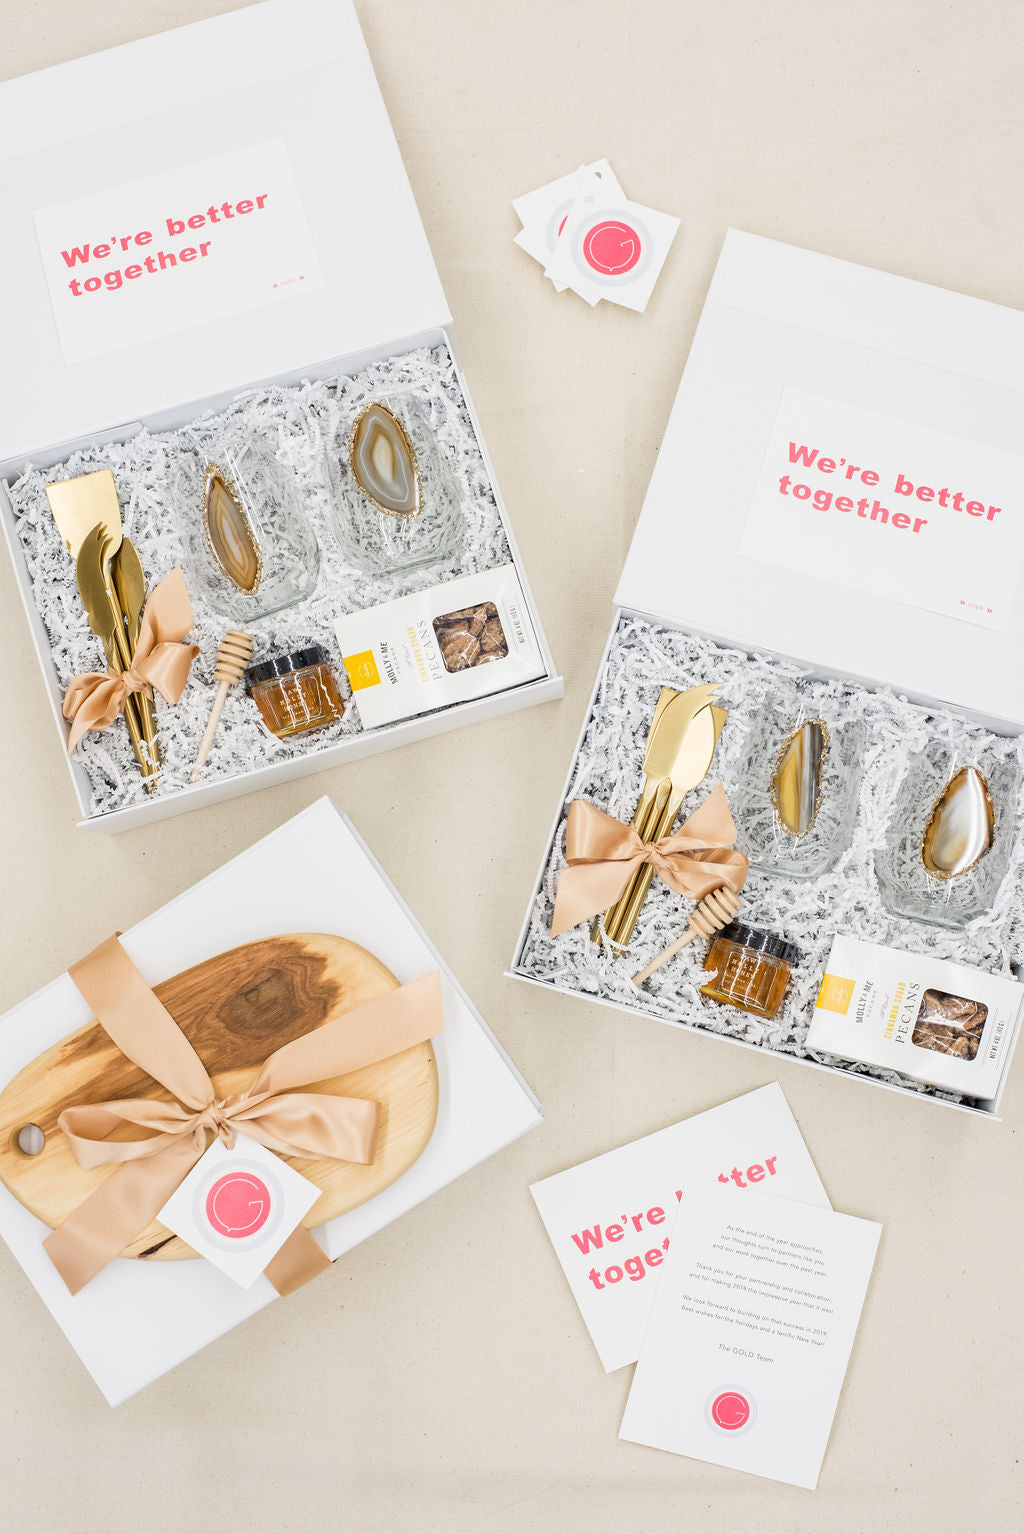 PR firm's corporate holiday client gift boxes by Marigold & Grey